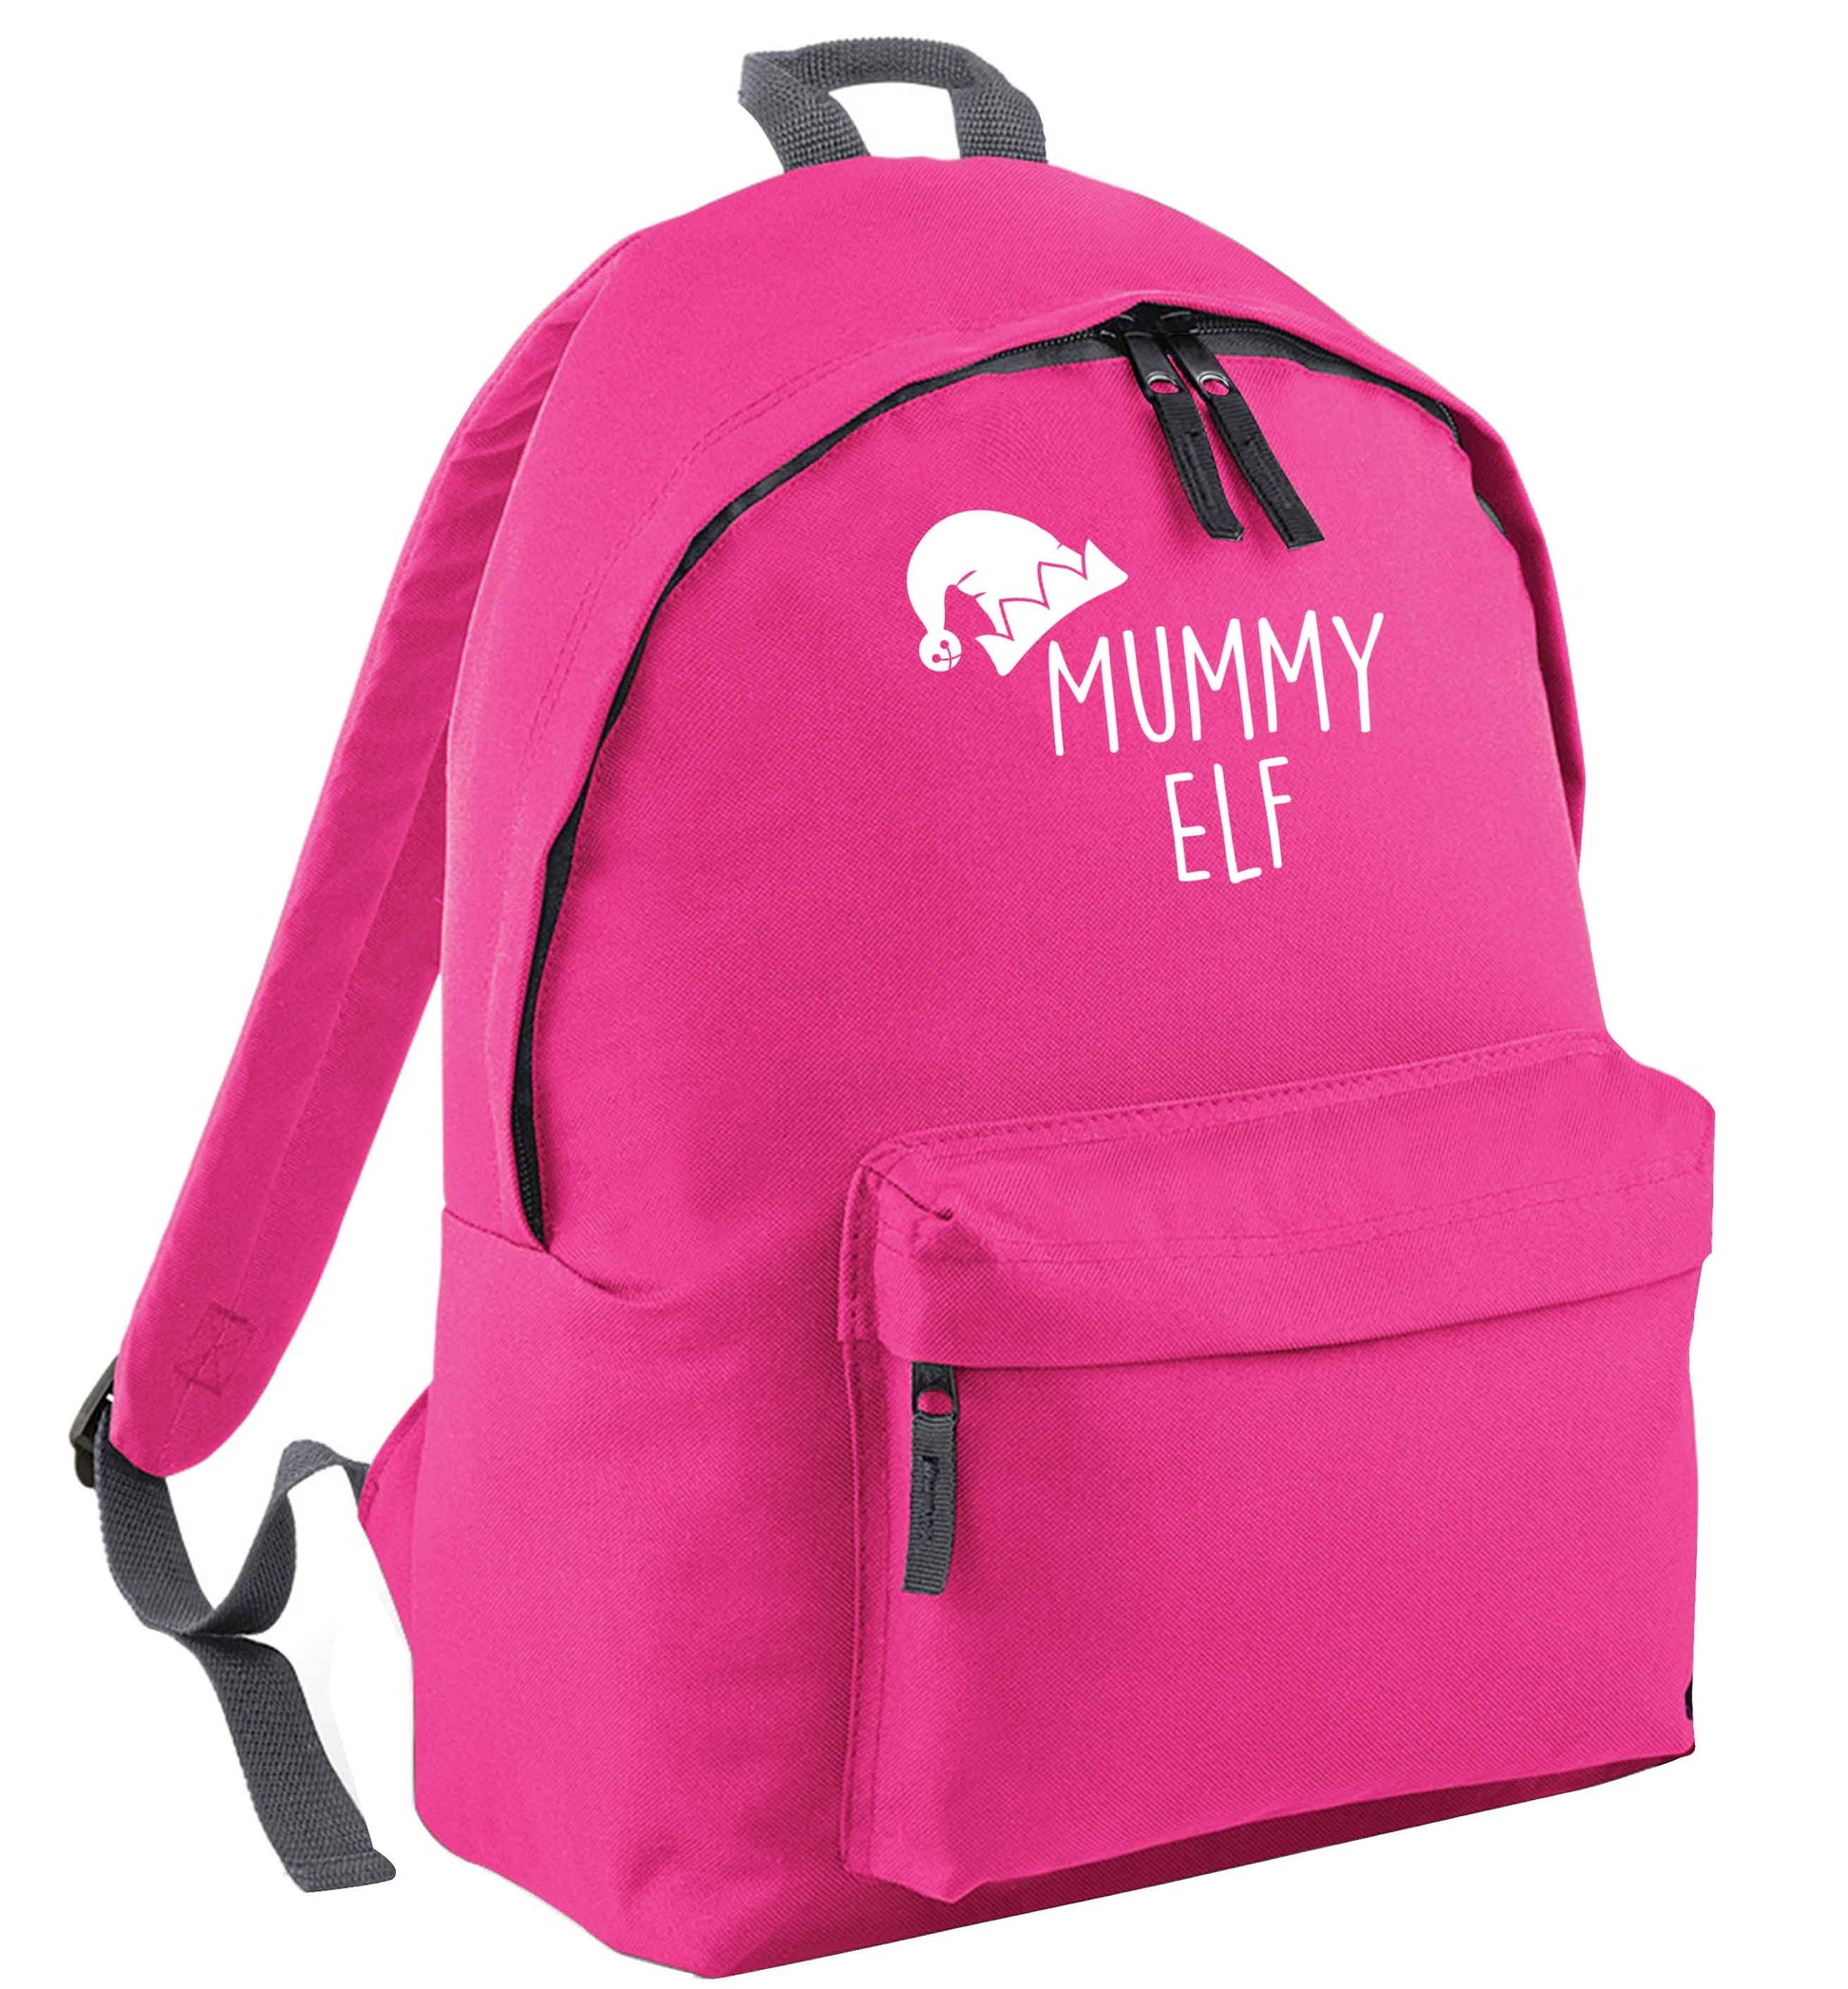 Mummy elf pink adults backpack